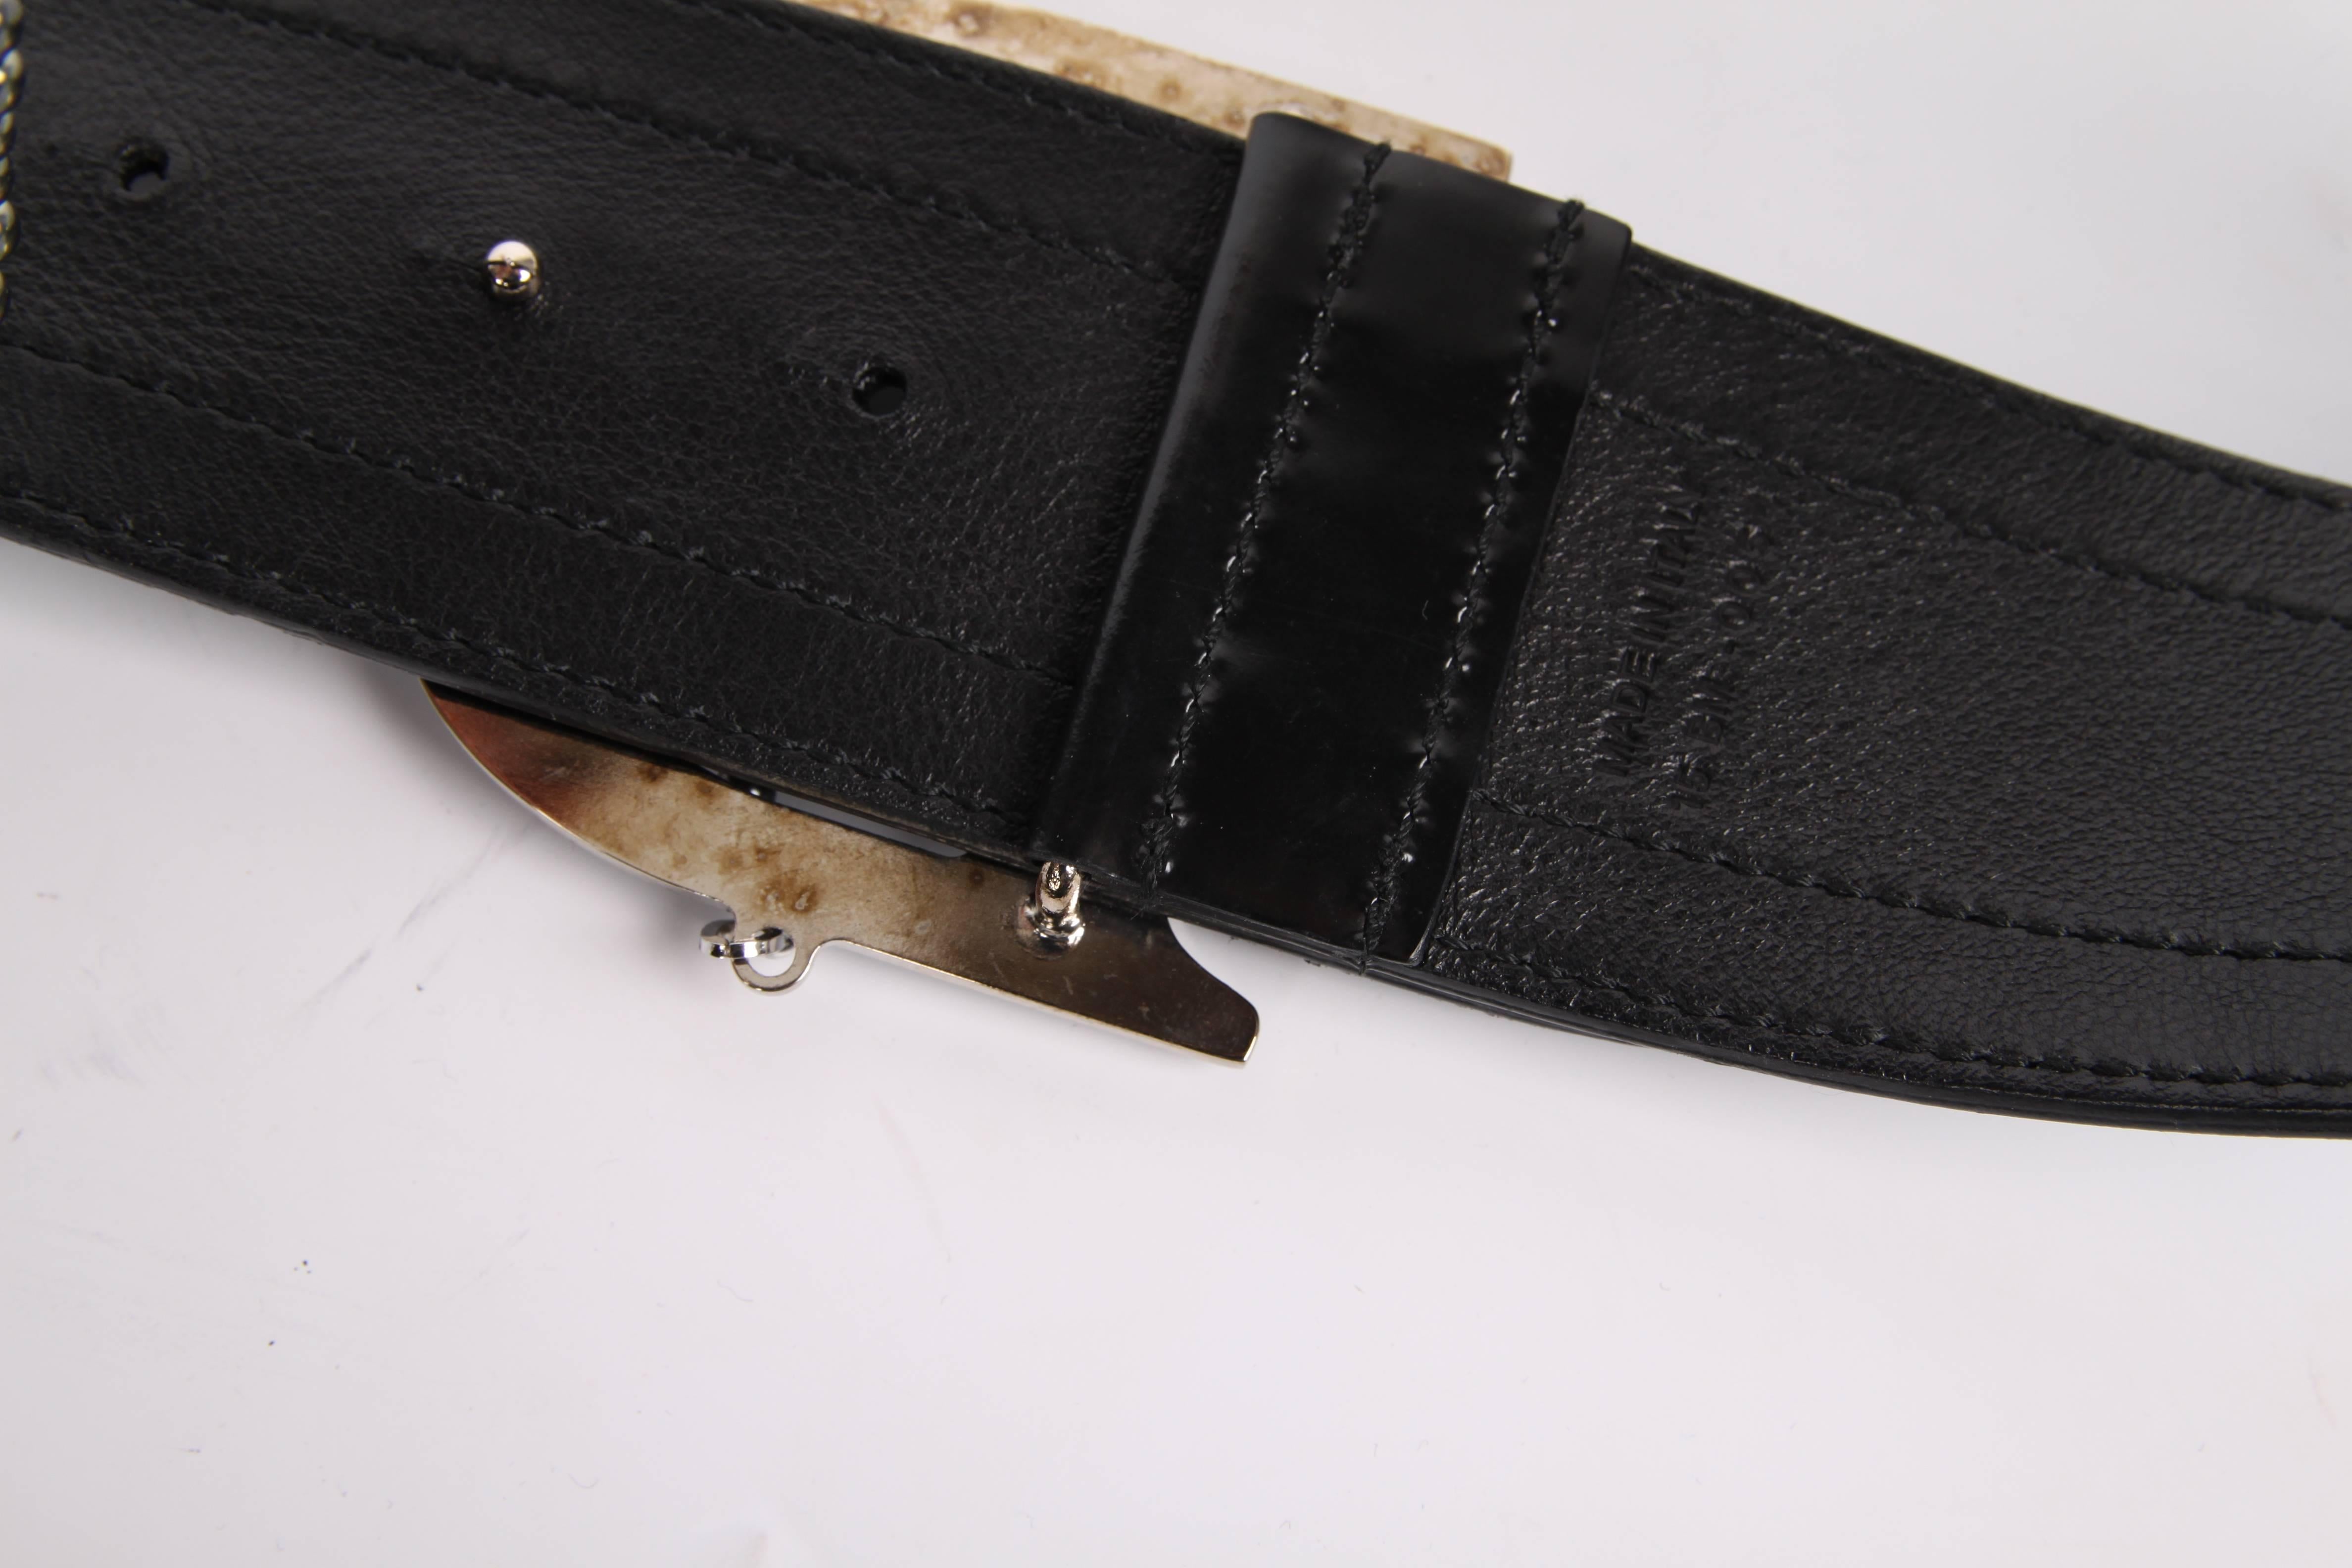 This one is super neat! A monogram belt by Christian Dior crafted of black leather with a big silver-tone reflecting D buckle.

Grey and white monogram canvas in the center, above and below a strip of black leather. A silver grey pearl string is